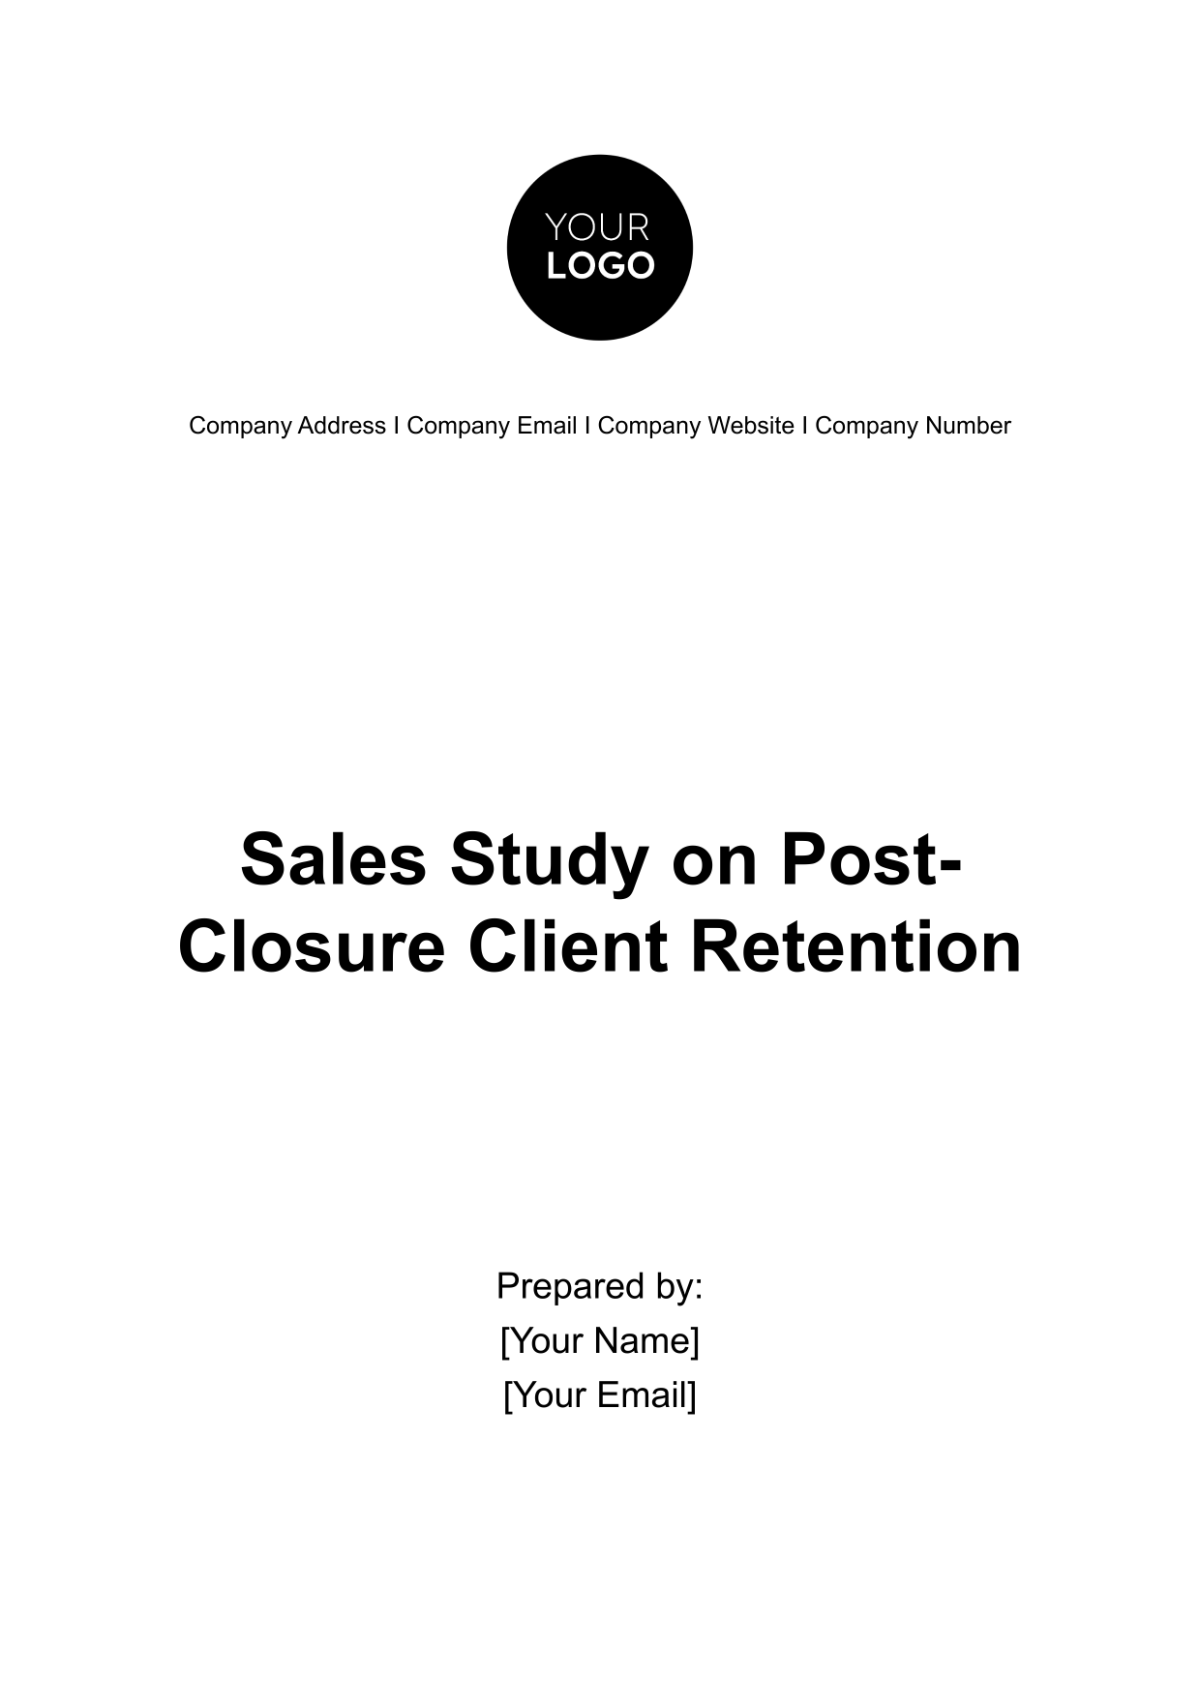 Free Sales Study on Post-Closure Client Retention Template